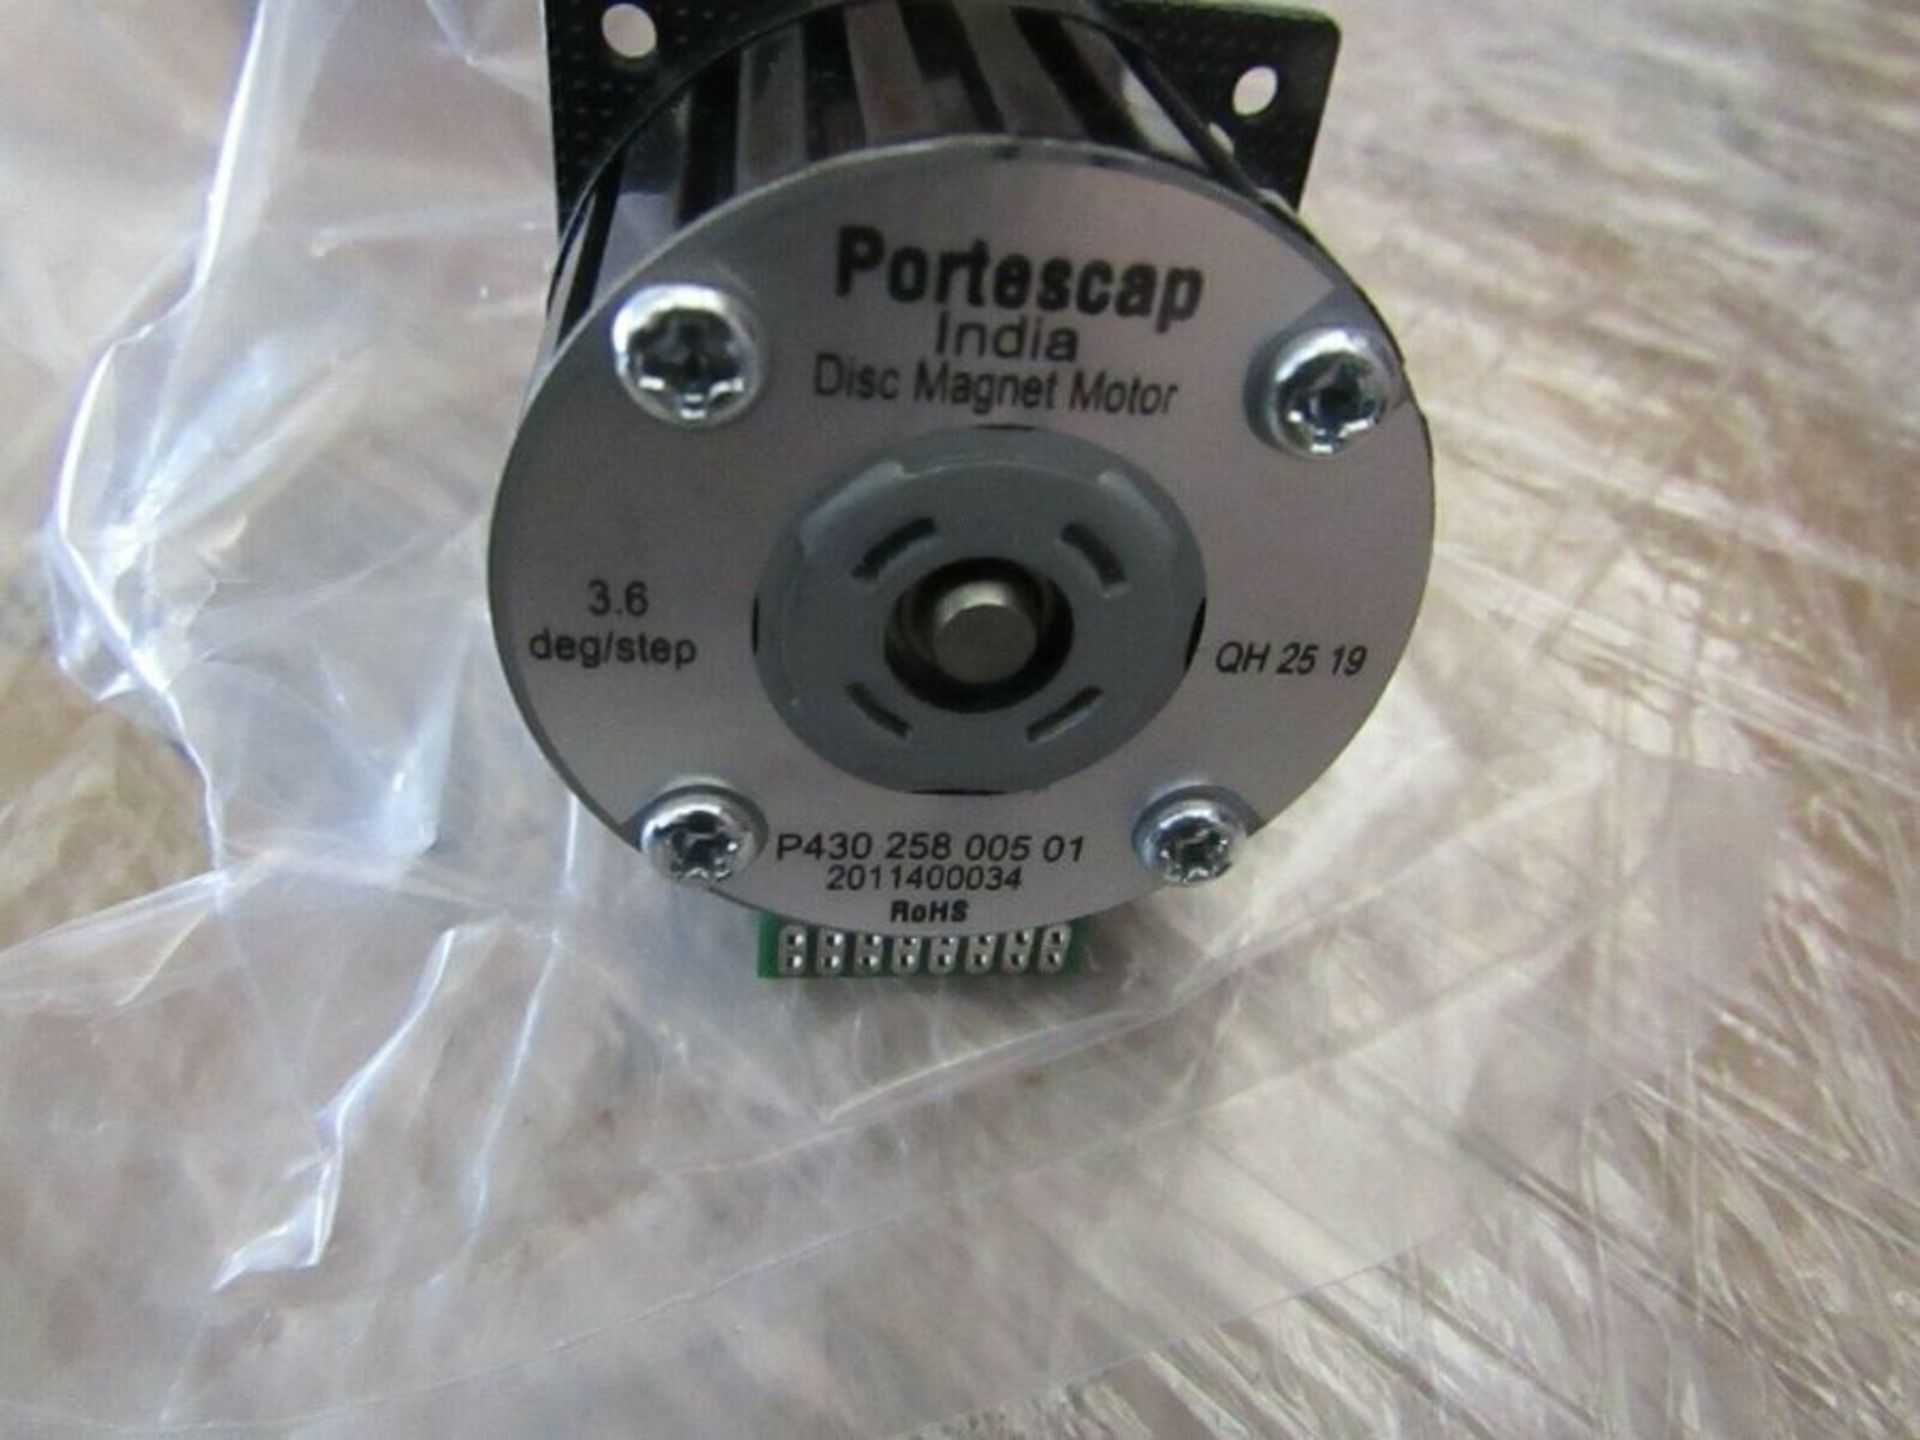 5 of these Portescap Series Disc Magnet Stepper Motor 3.6° 90mNm 560mA 8 Wires 585 8928164 - Image 2 of 2